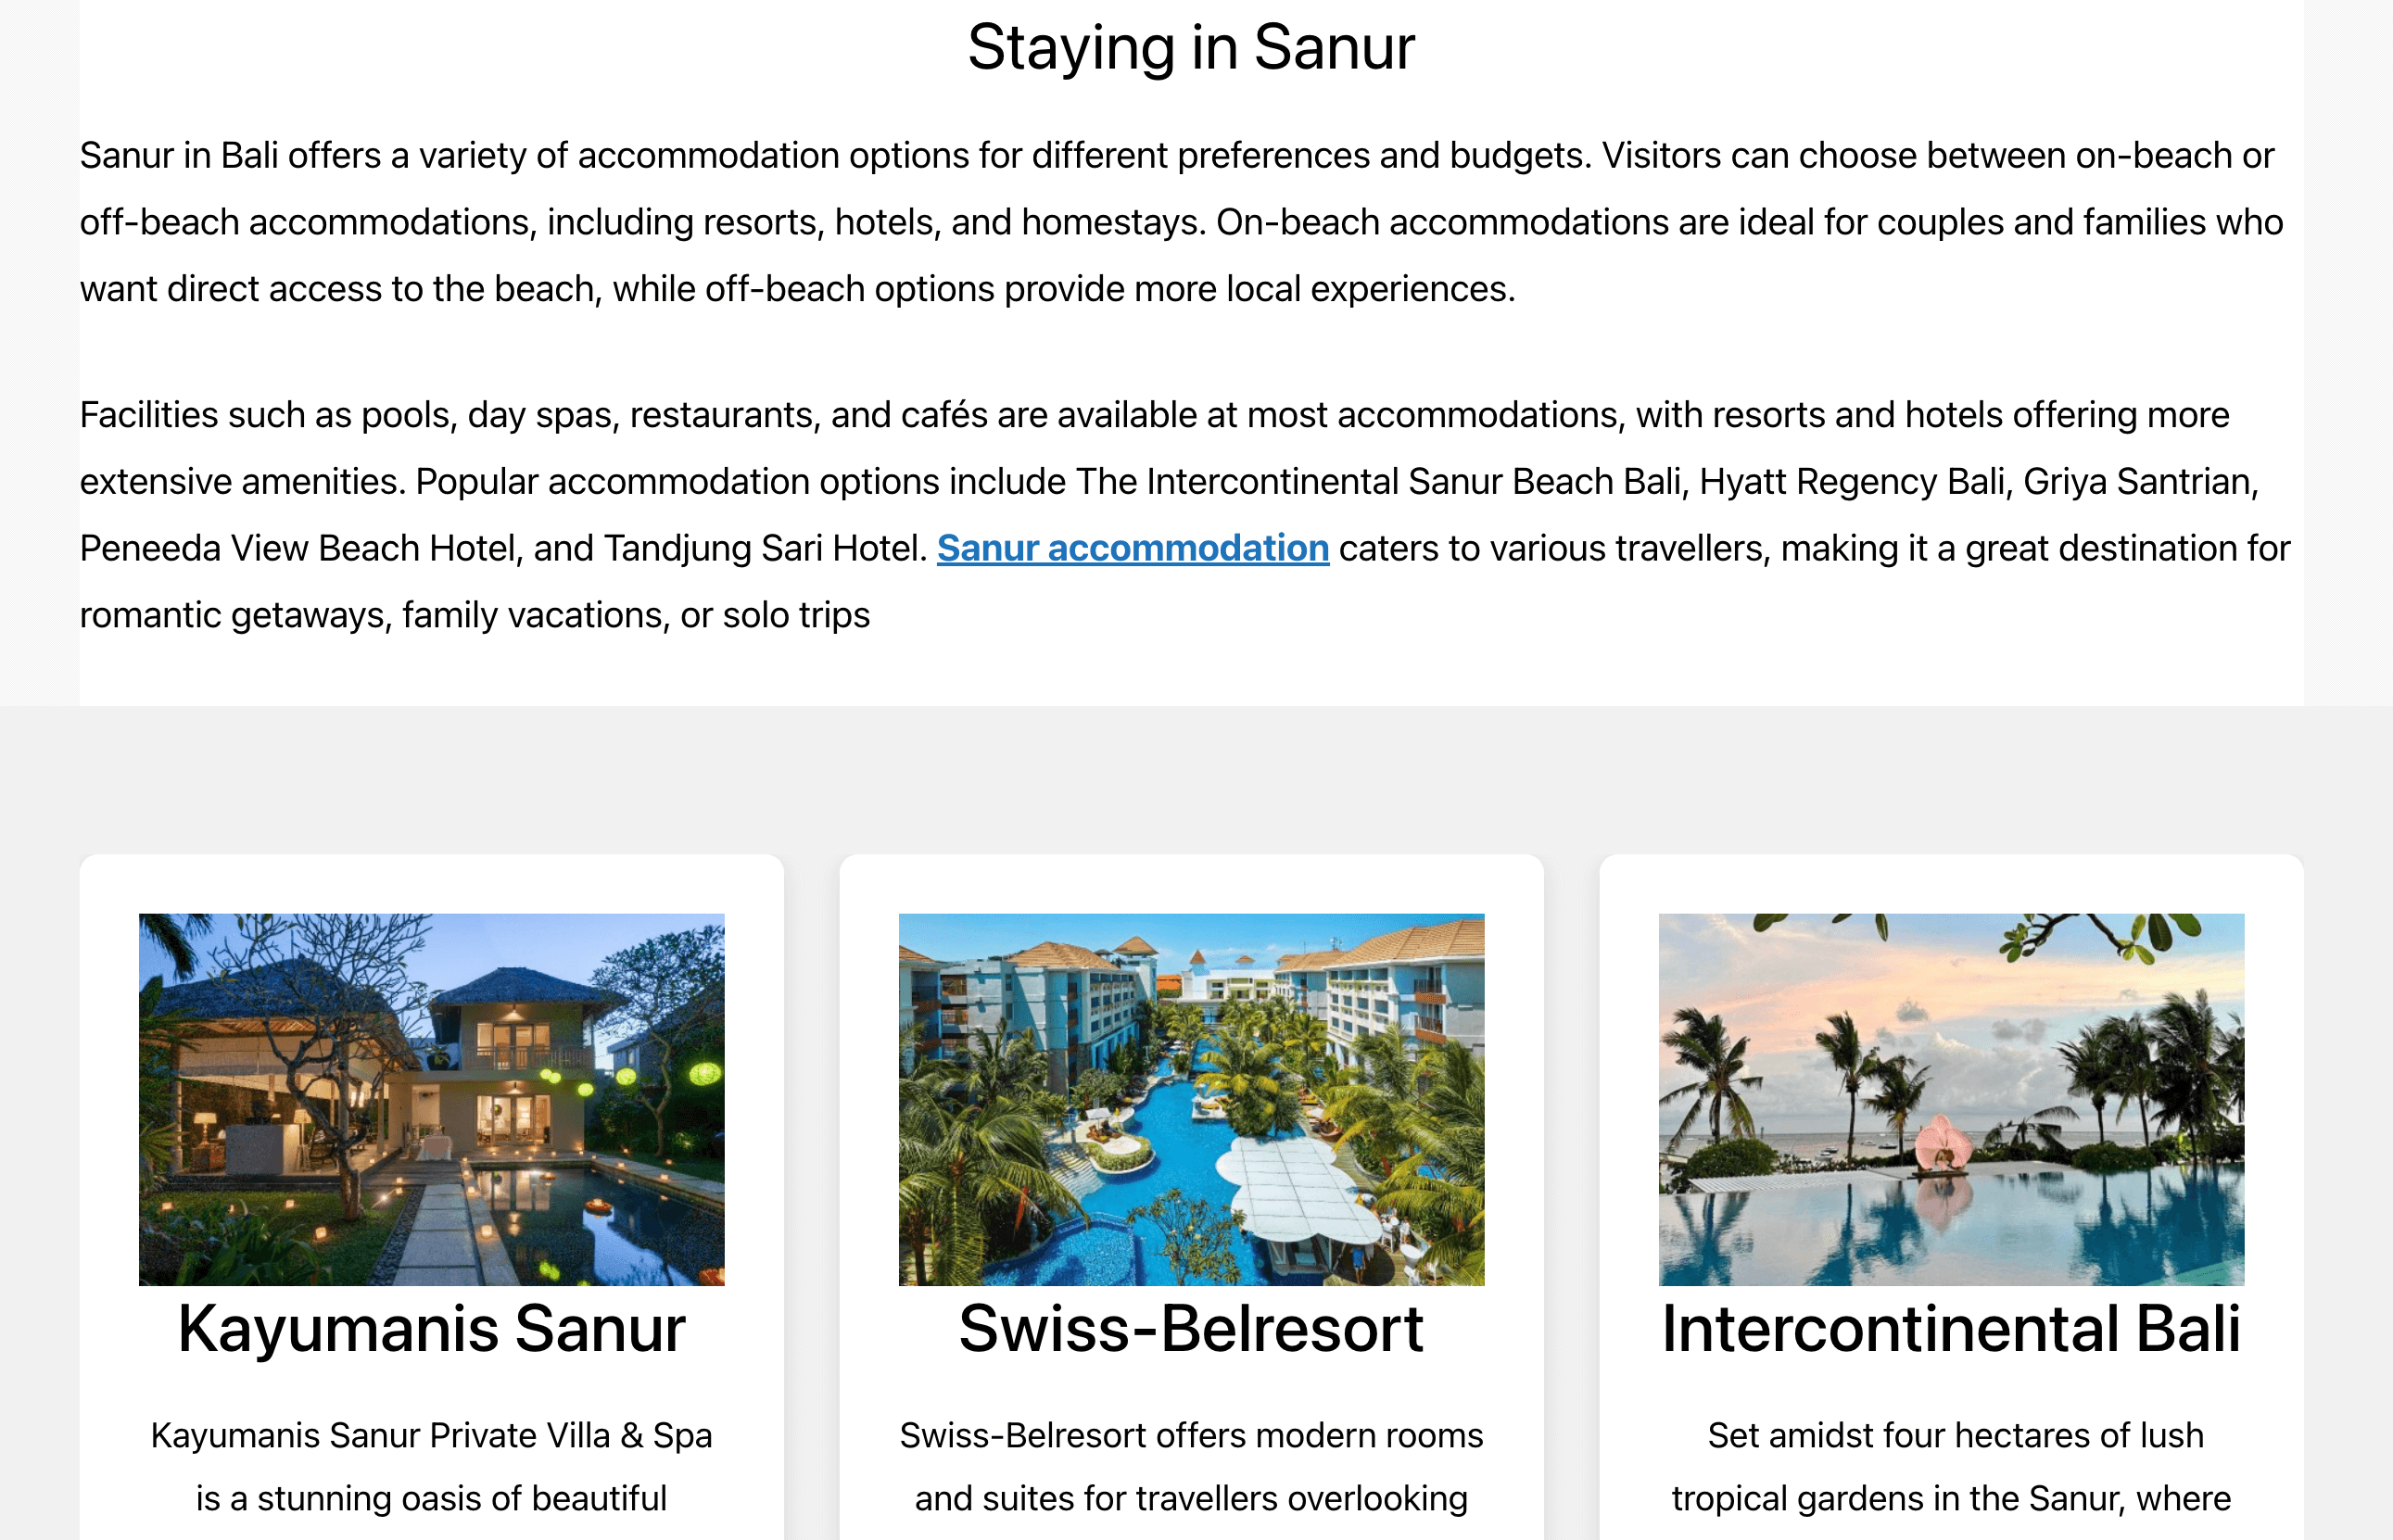 The Things to Do in Sanur website page